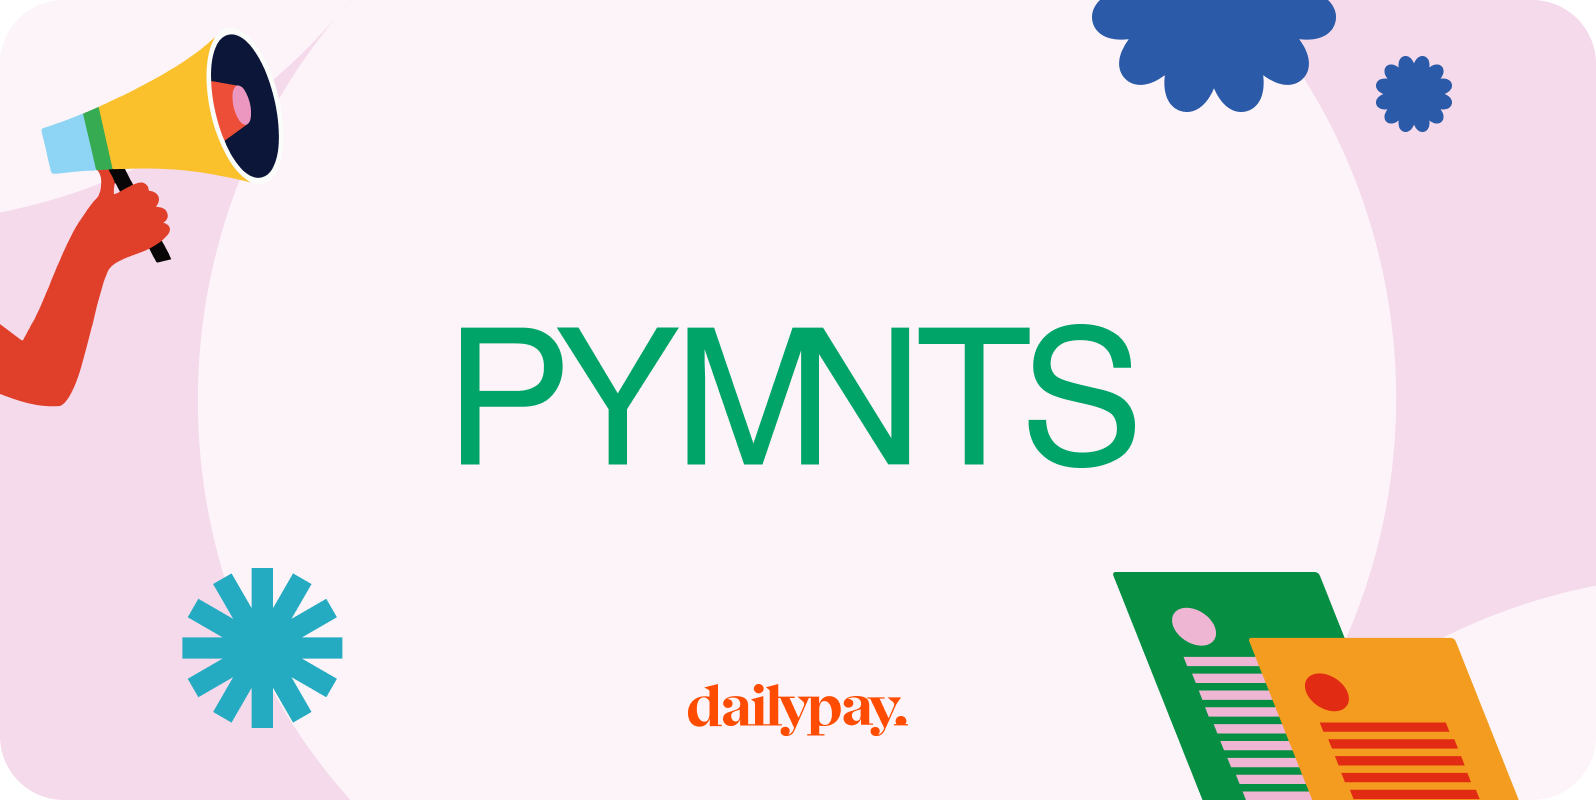 A graphic with the text "PYMNTS" in green. The dailypay logo is at the bottom. Decorative elements include hands holding a megaphone, a document, and abstract shapes.